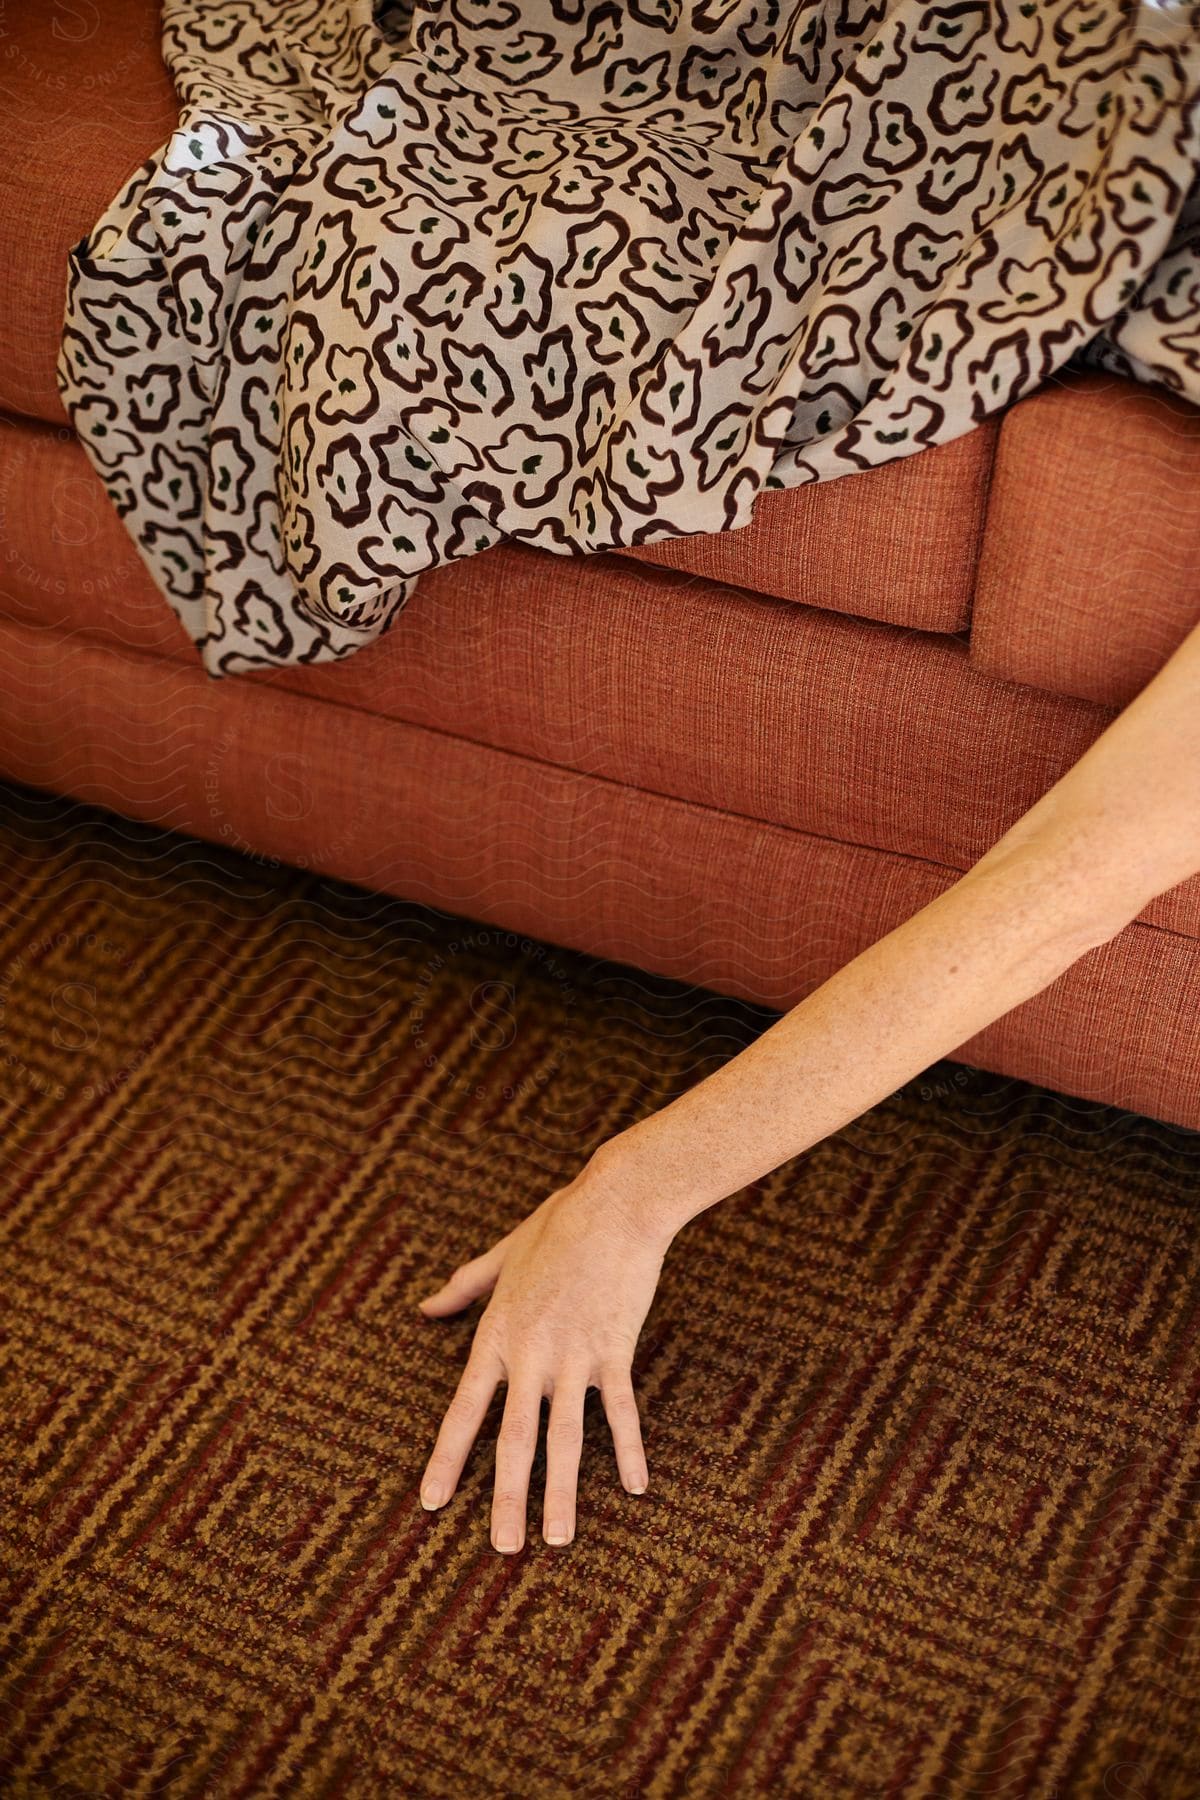 A person's hand under a rug lying on a red sofa, reaching the floor.